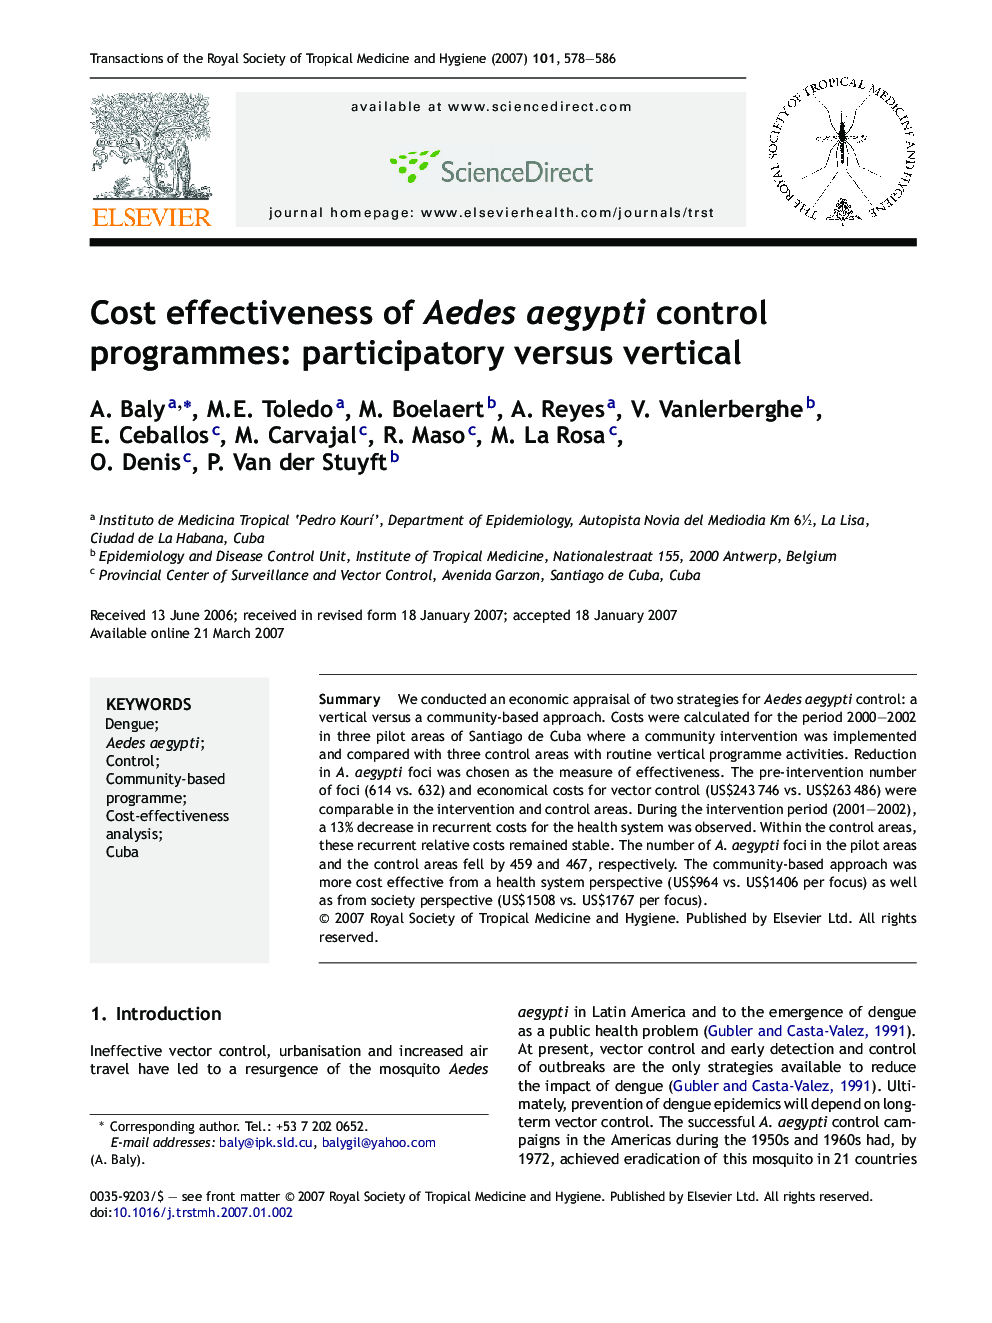 Cost effectiveness of Aedes aegypti control programmes: participatory versus vertical